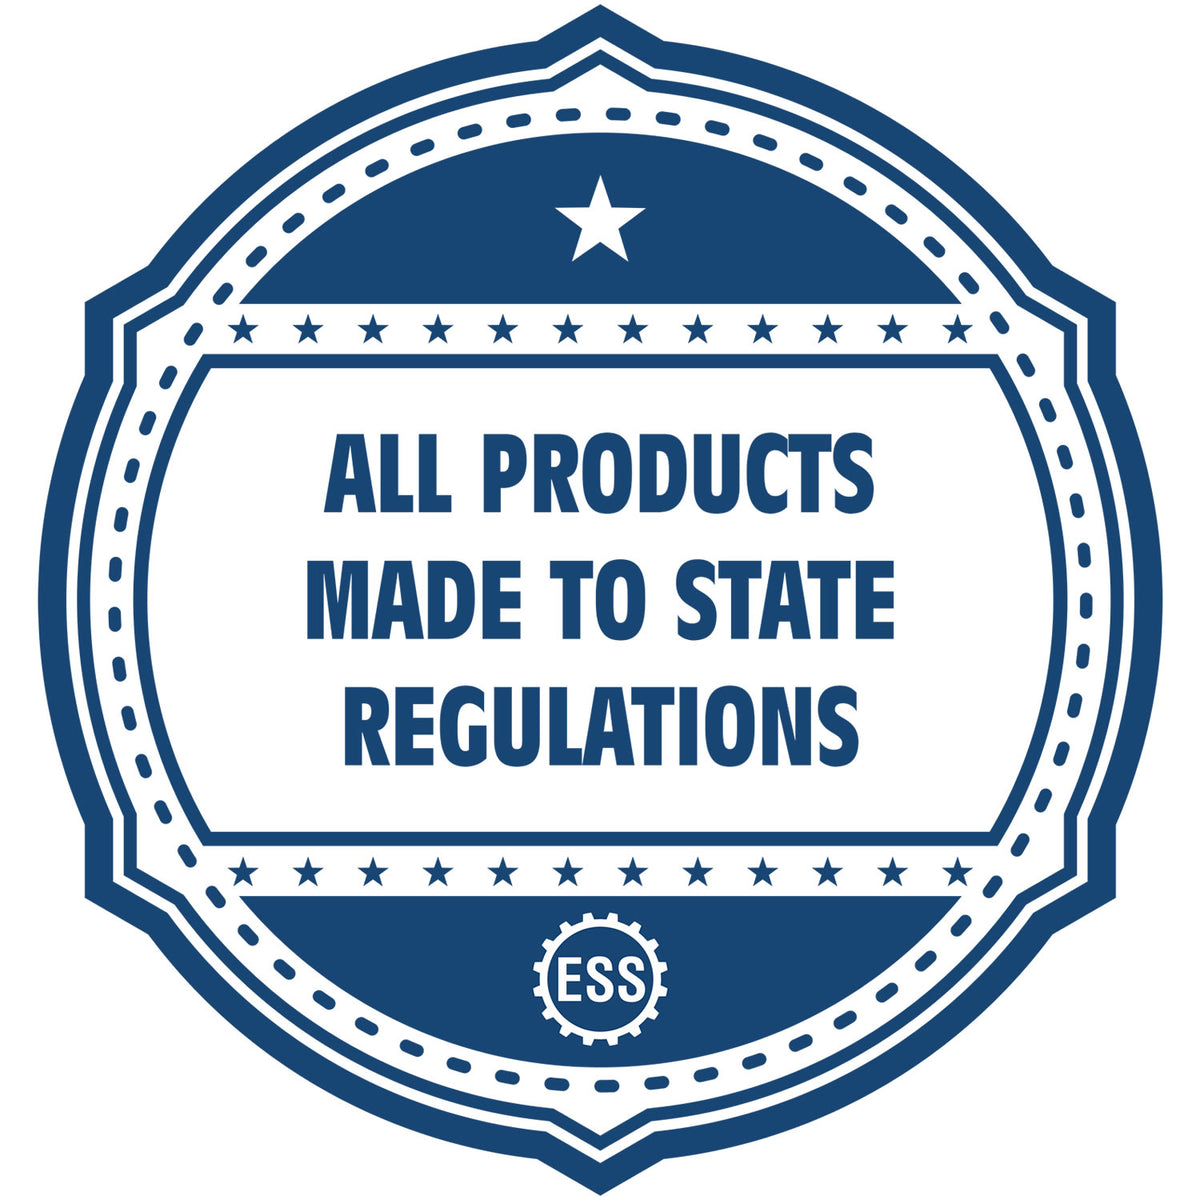 An icon or badge element for the Soft Rhode Island Professional Engineer Seal showing that this product is made in compliance with state regulations.